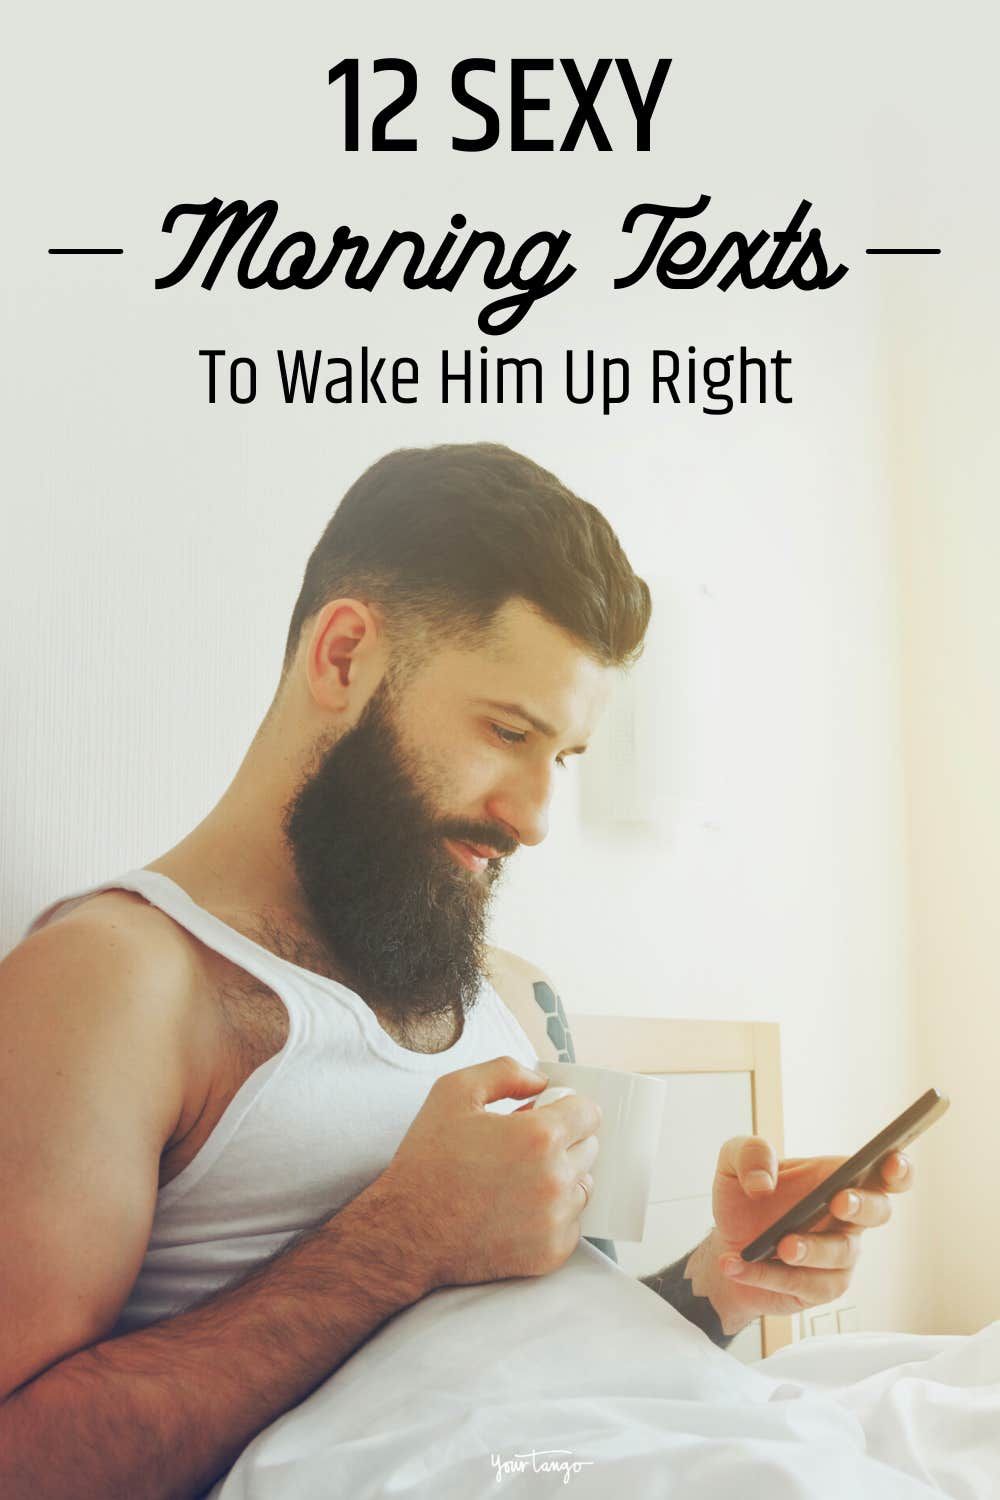 12 Sexy Good Morning Texts To Wake Him Up Right